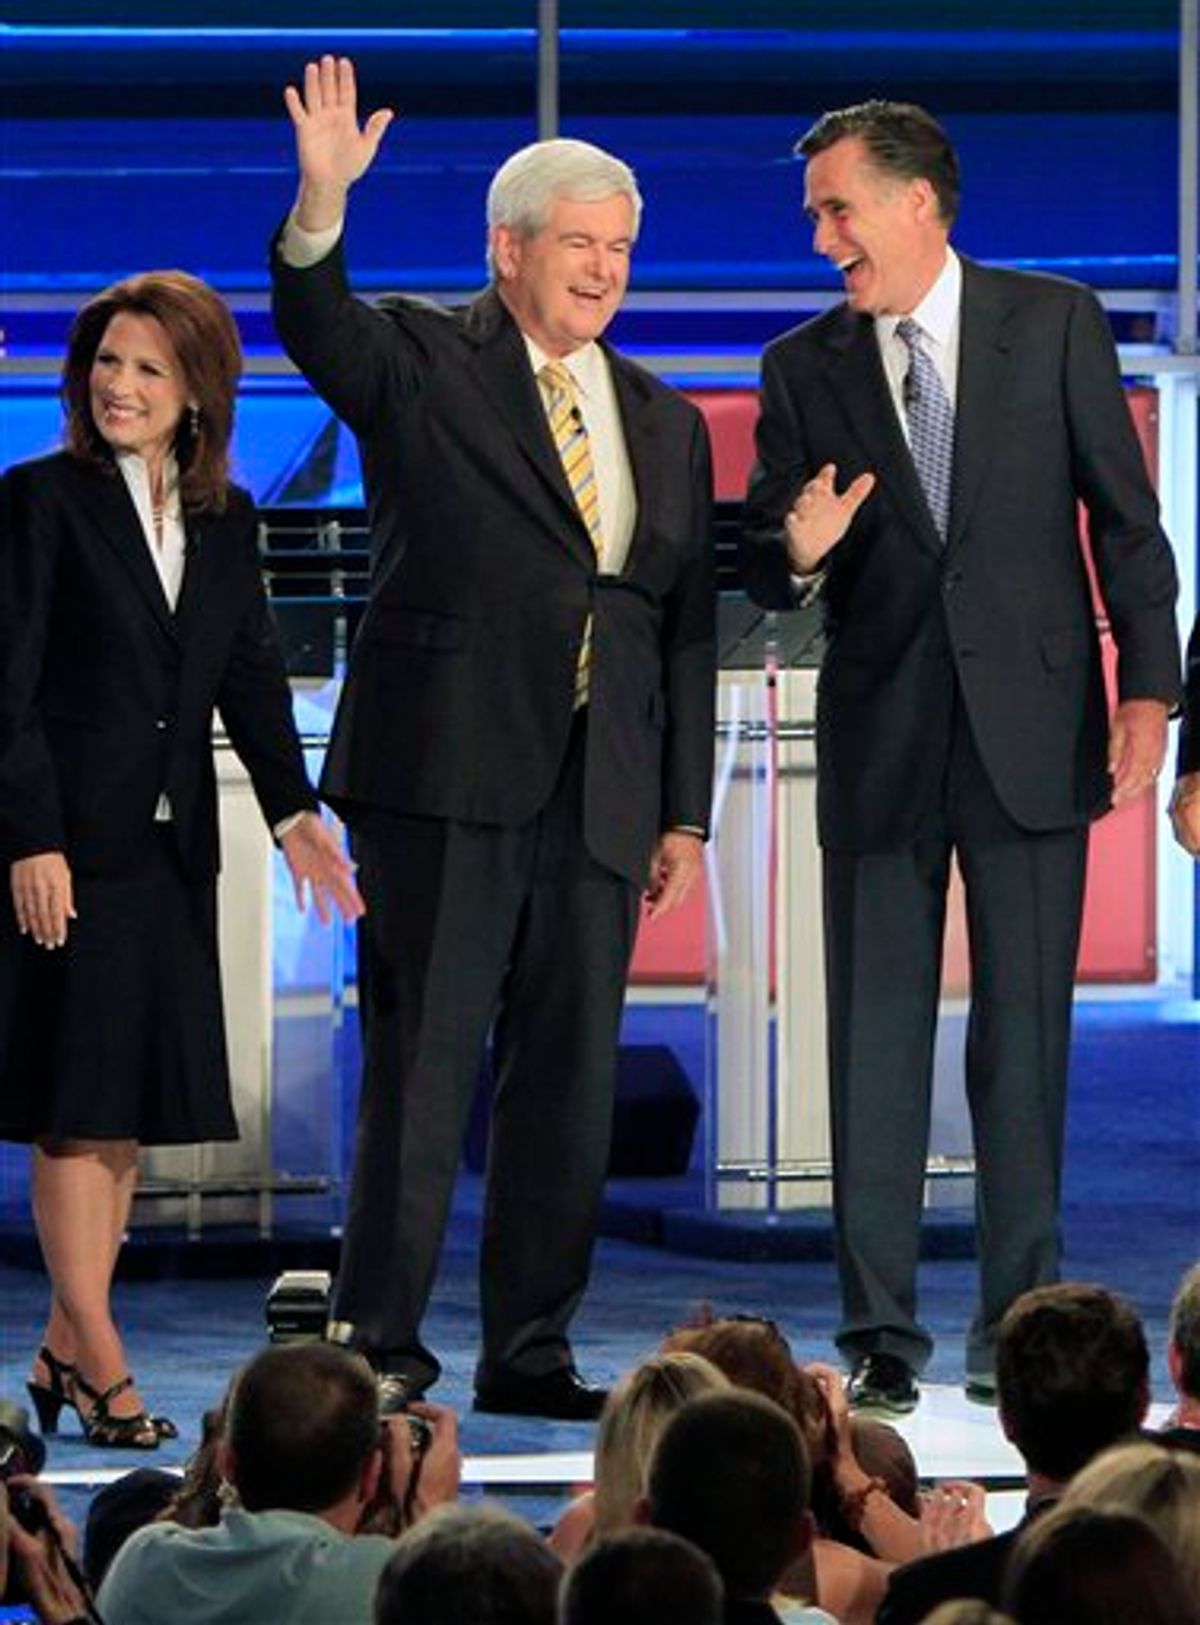 Former Massachusetts Gov. Mitt Romney, right, and former House Speaker Newt Gingrich share a laugh as they wave before the first New Hampshire Republican presidential debate at St. Anselm College in Manchester, N.H., Monday, June 13, 2011. Rep. Michele Bachmann, R-Minn., is at left. (AP Photo/Jim Cole)  (AP)